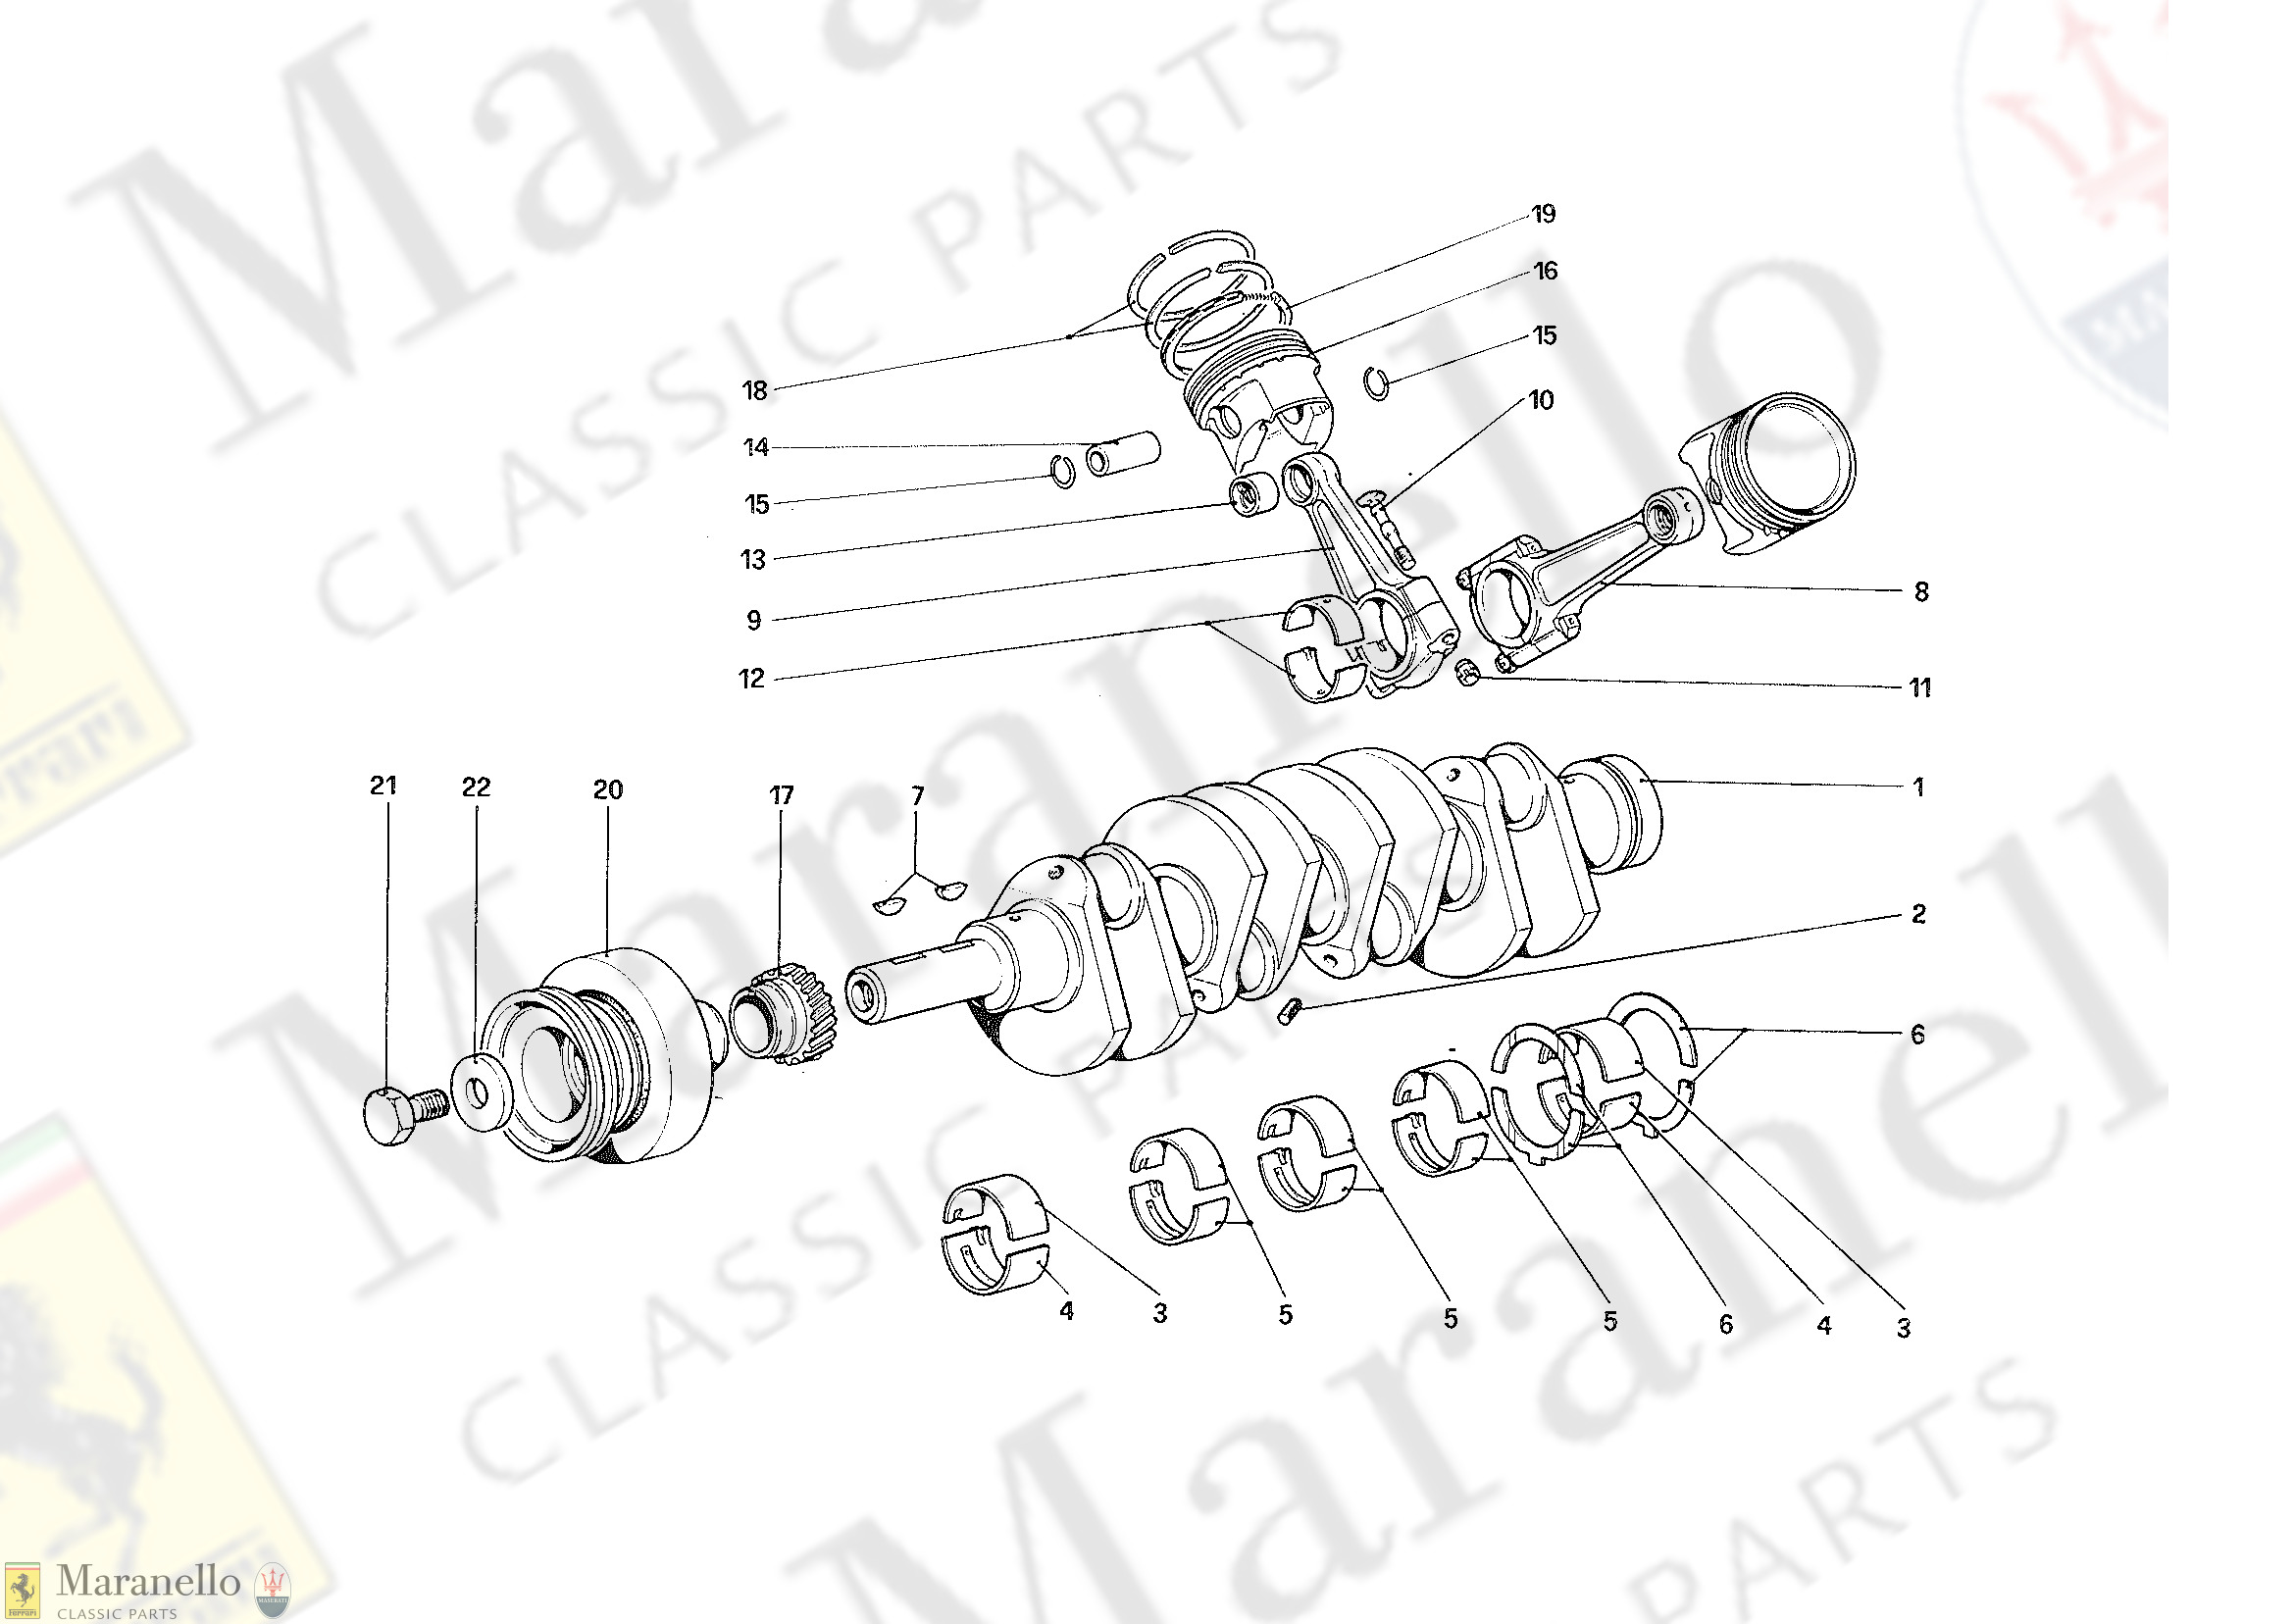 003 - Crankshaft - Connecting rods and pistons